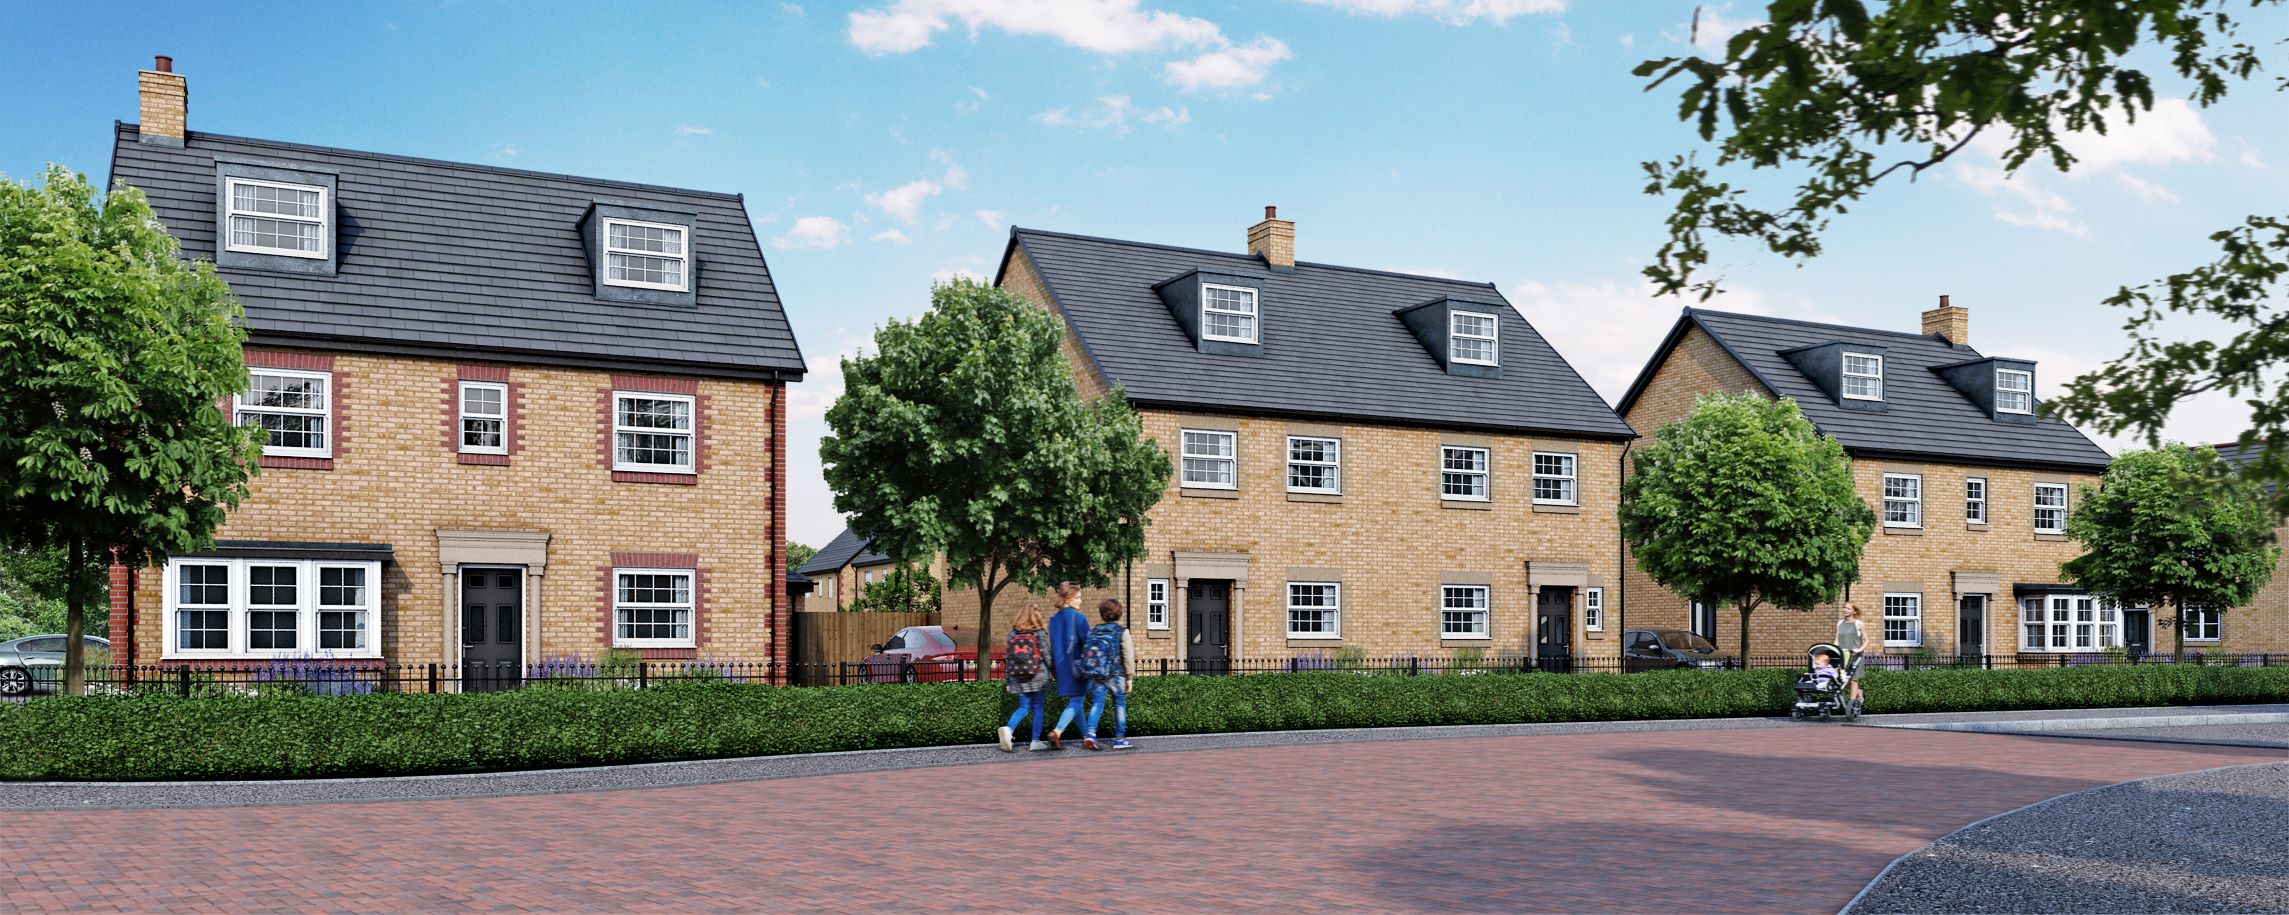 First Homes Go on Sale at New Ely Development